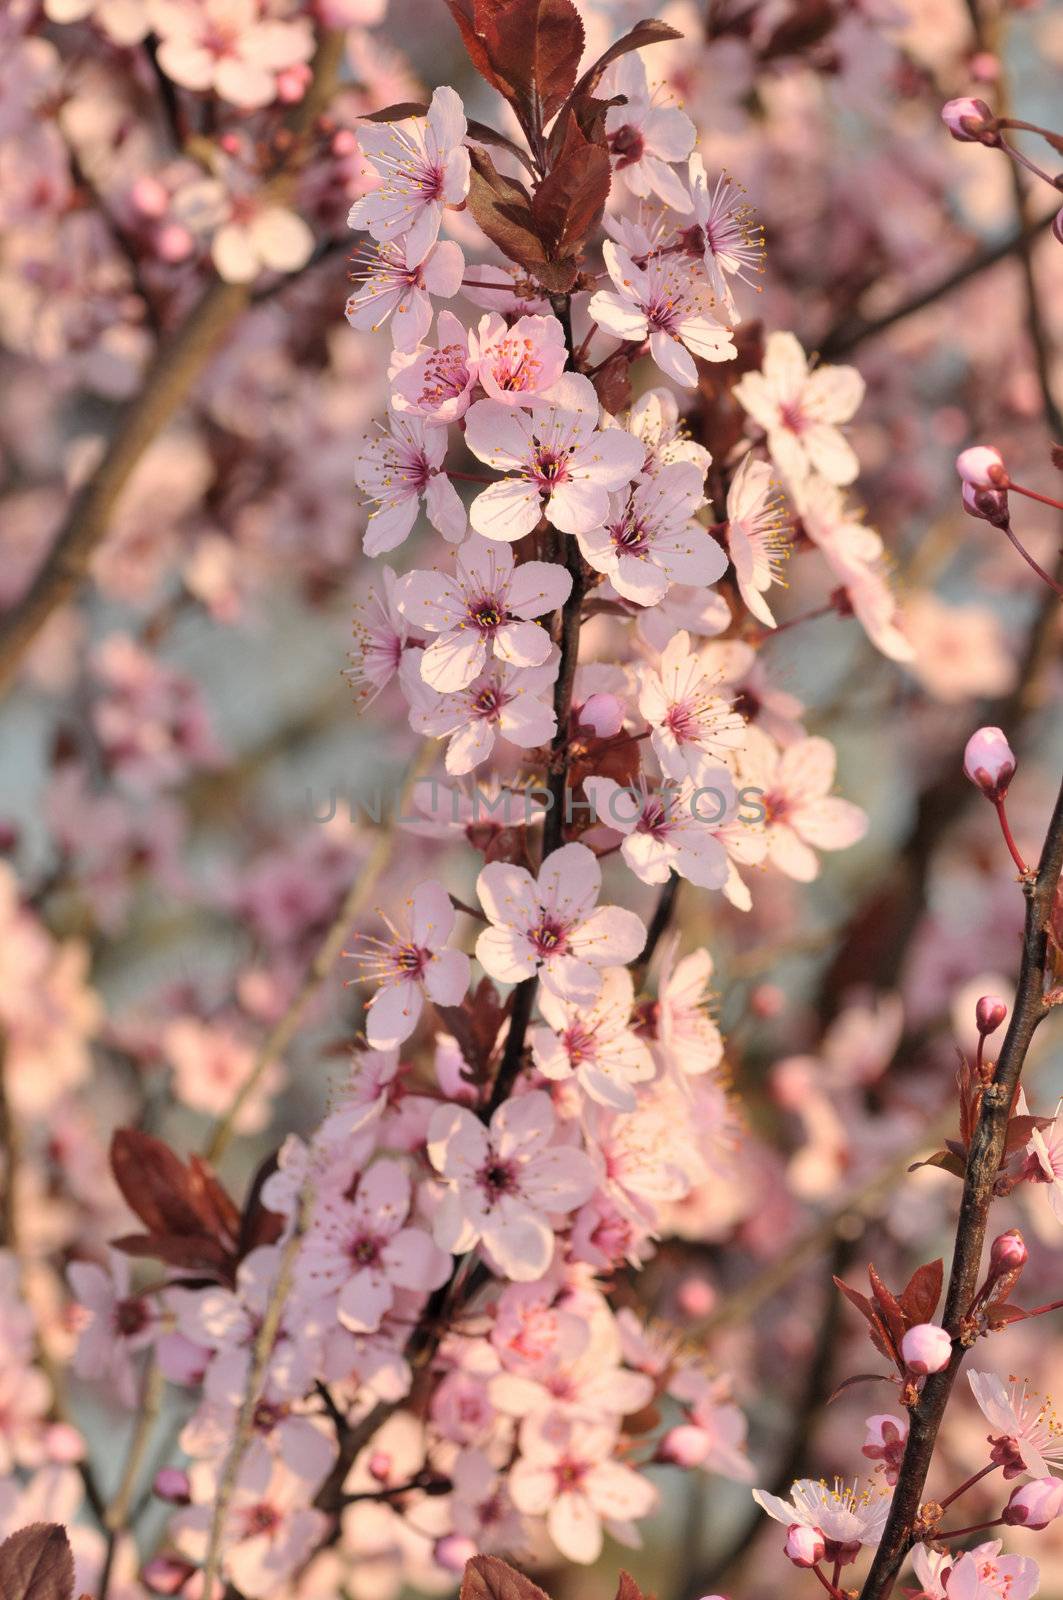 Cherry blossoms at the arrival of the spring season